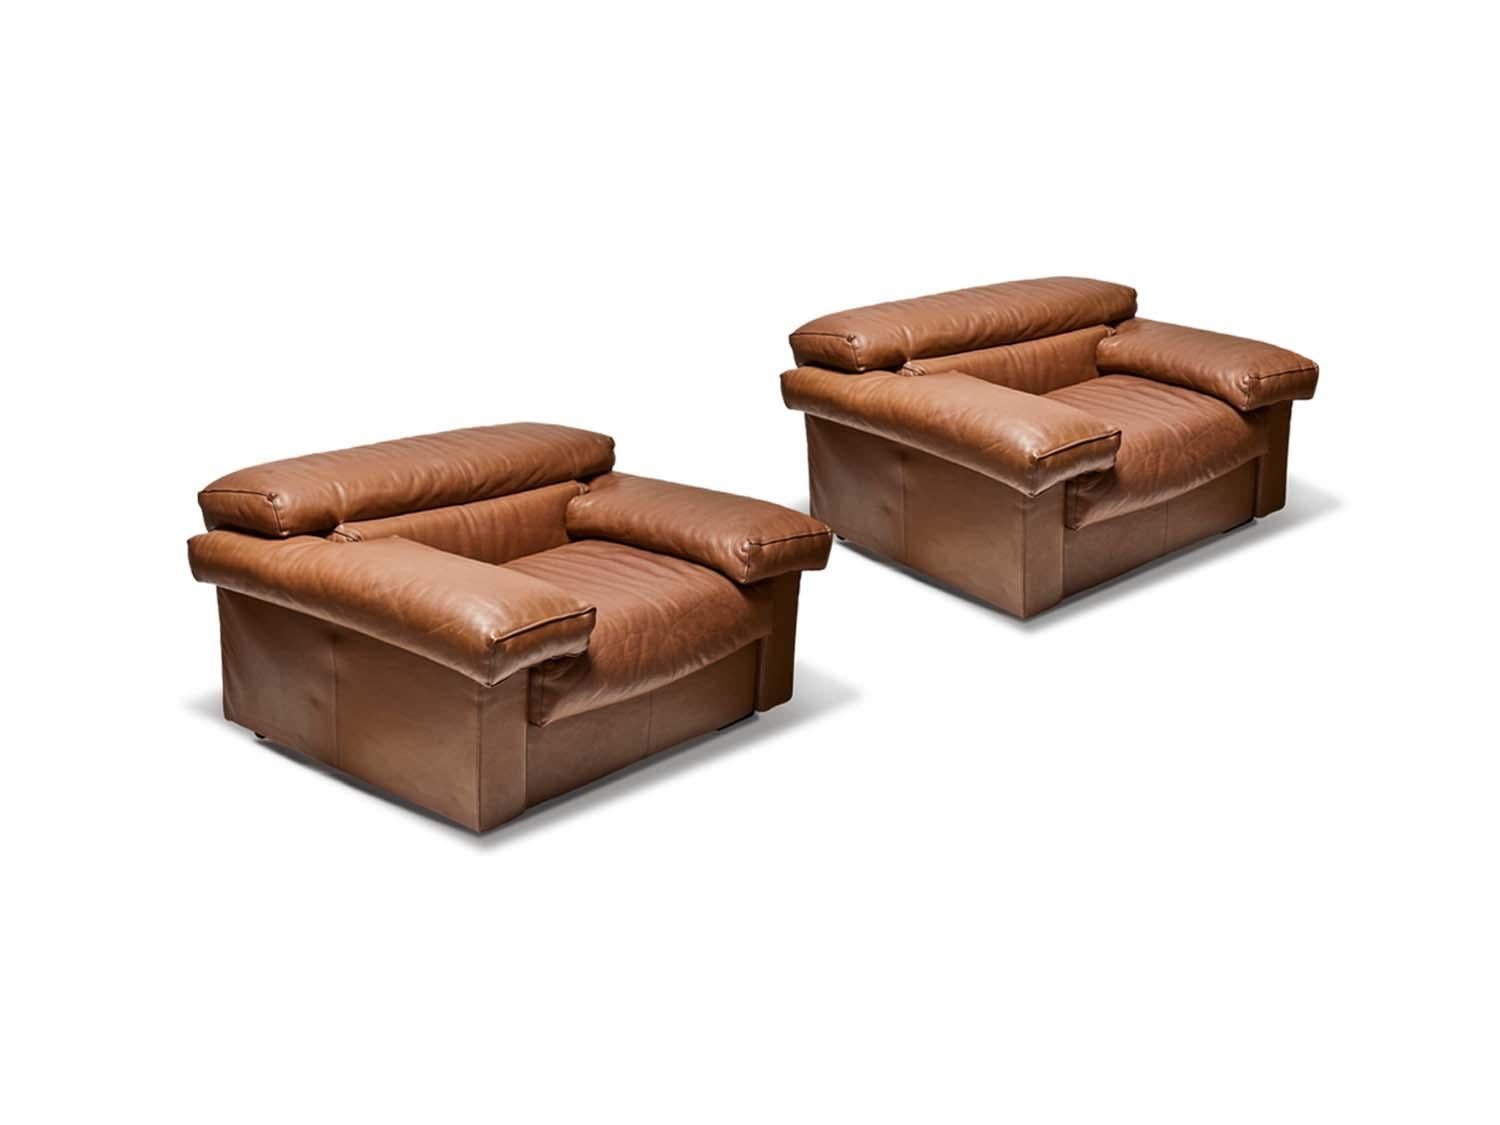 Pair of leather lounge chairs by Tobia Scarpa.